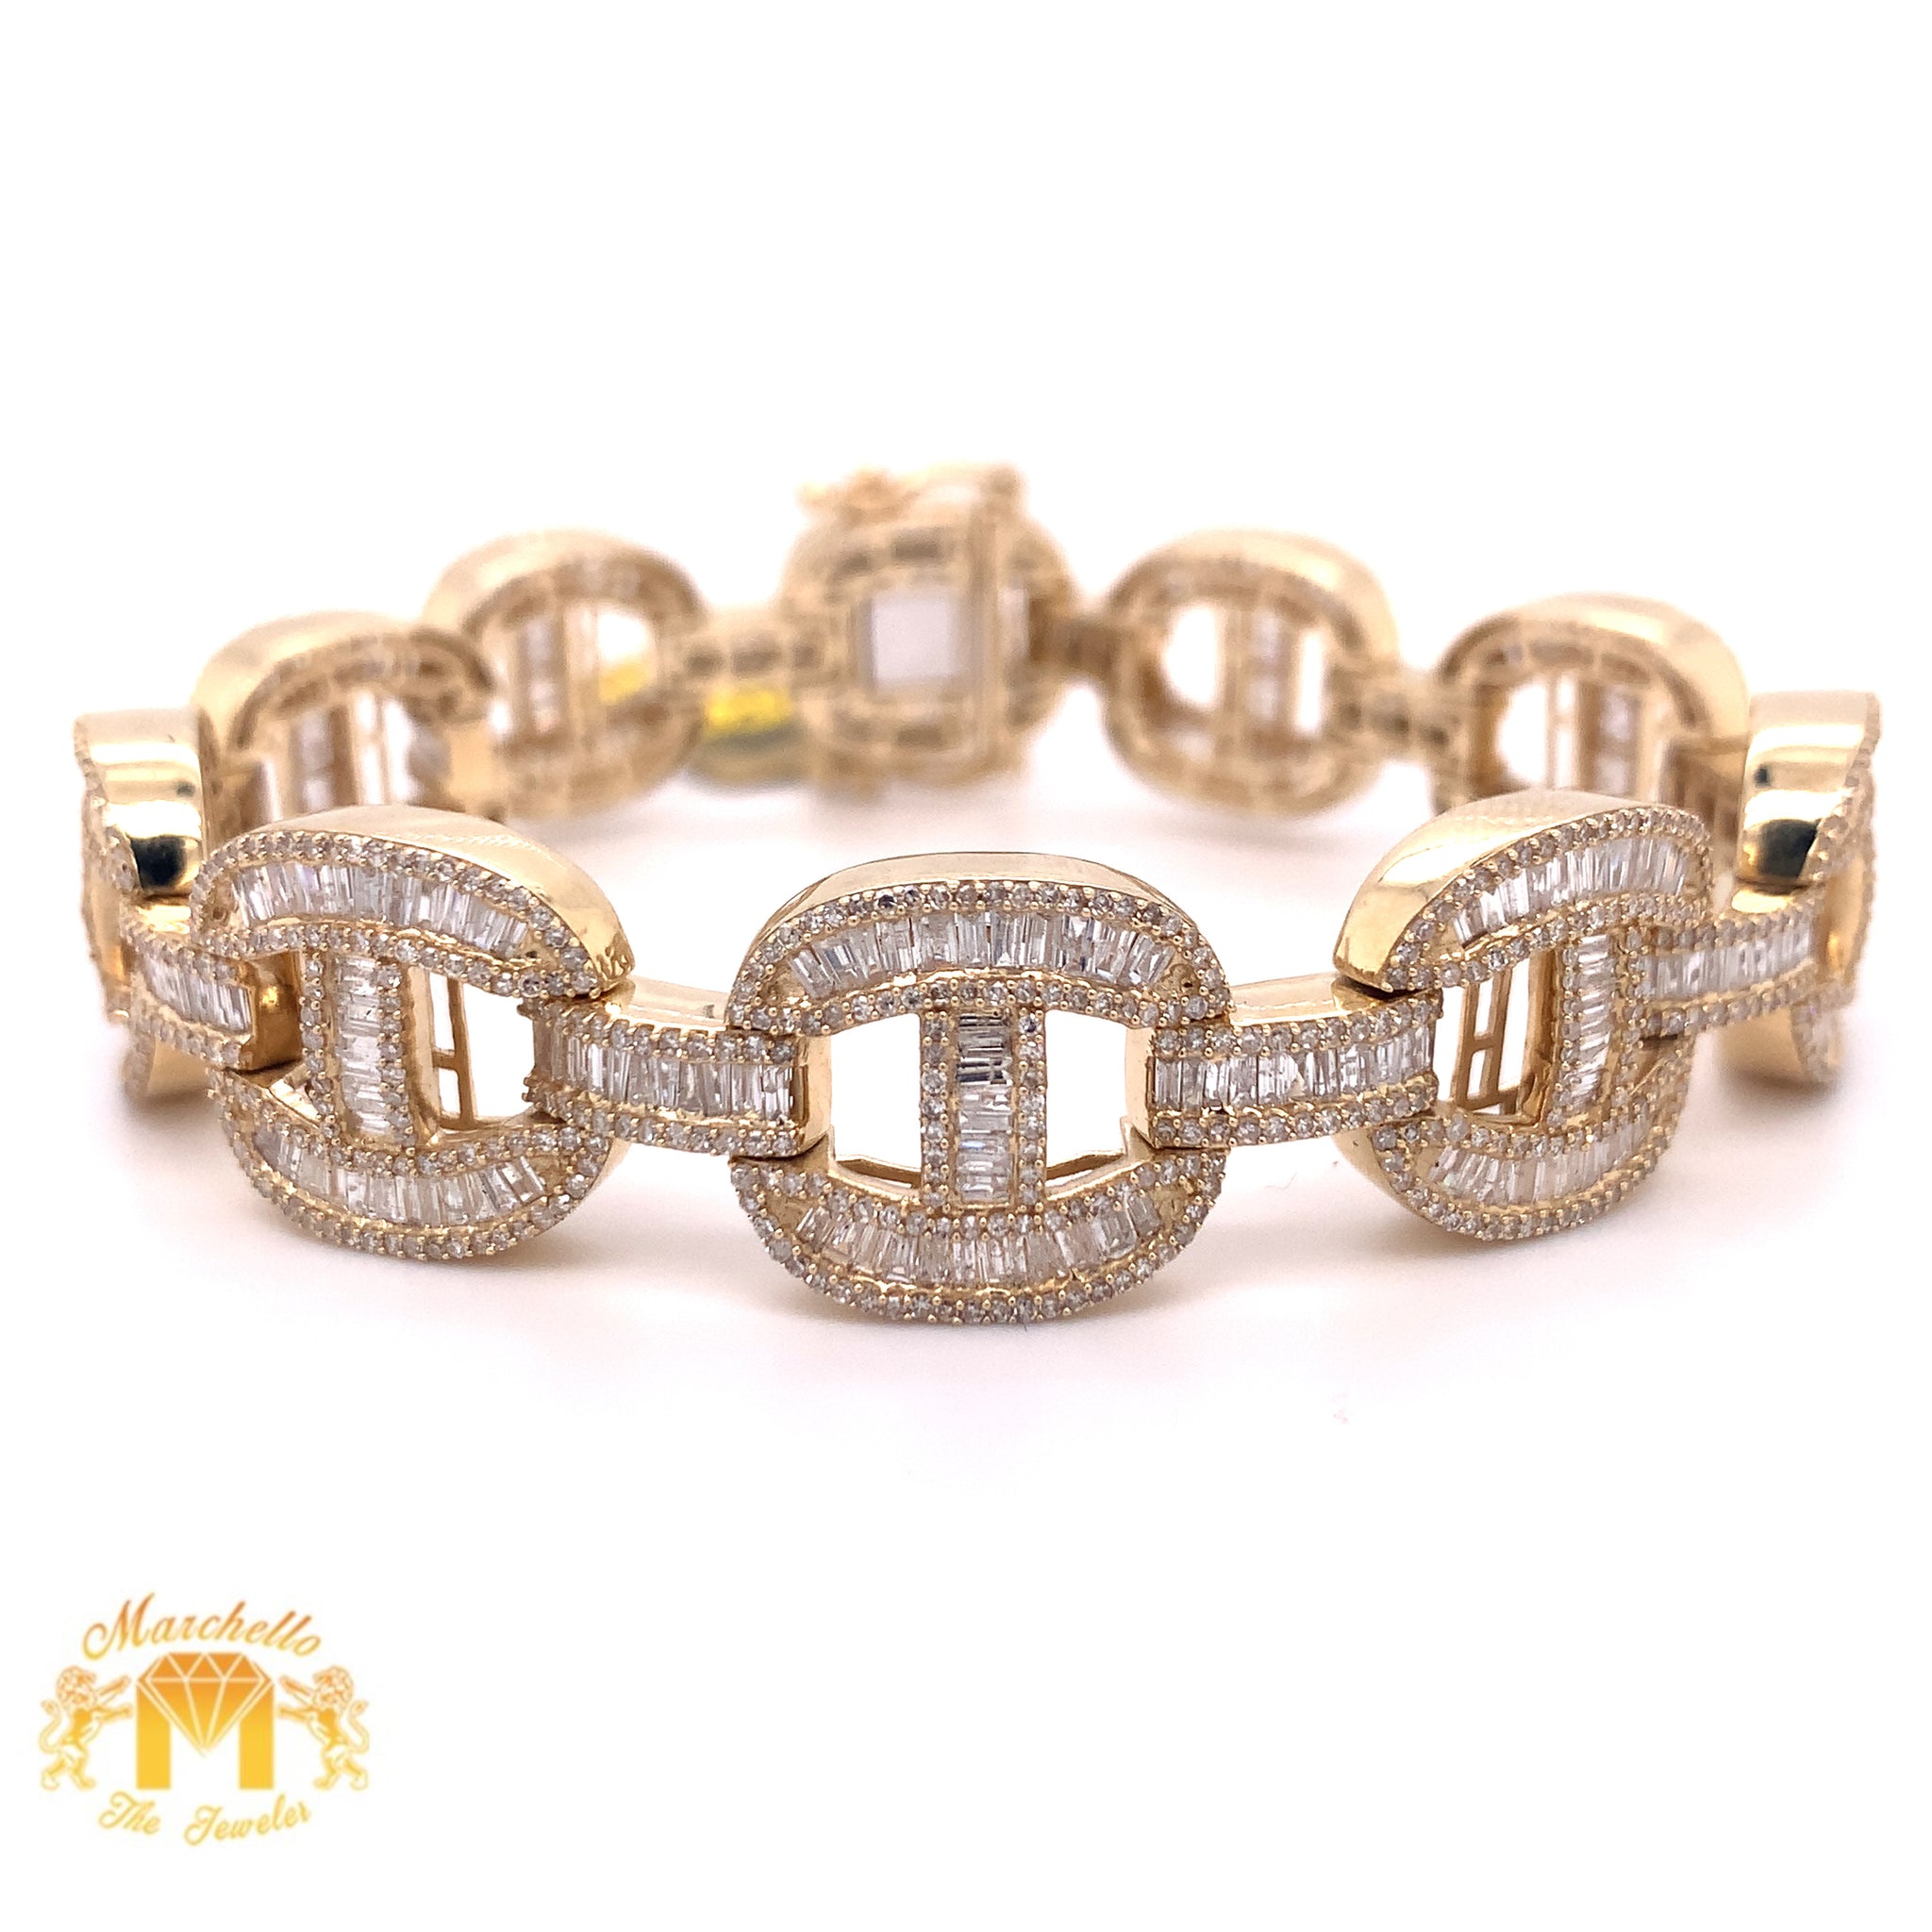 Mariner Link Bracelet in 14k Yellow Gold (5.5mm) - Richard Cannon Jewelry